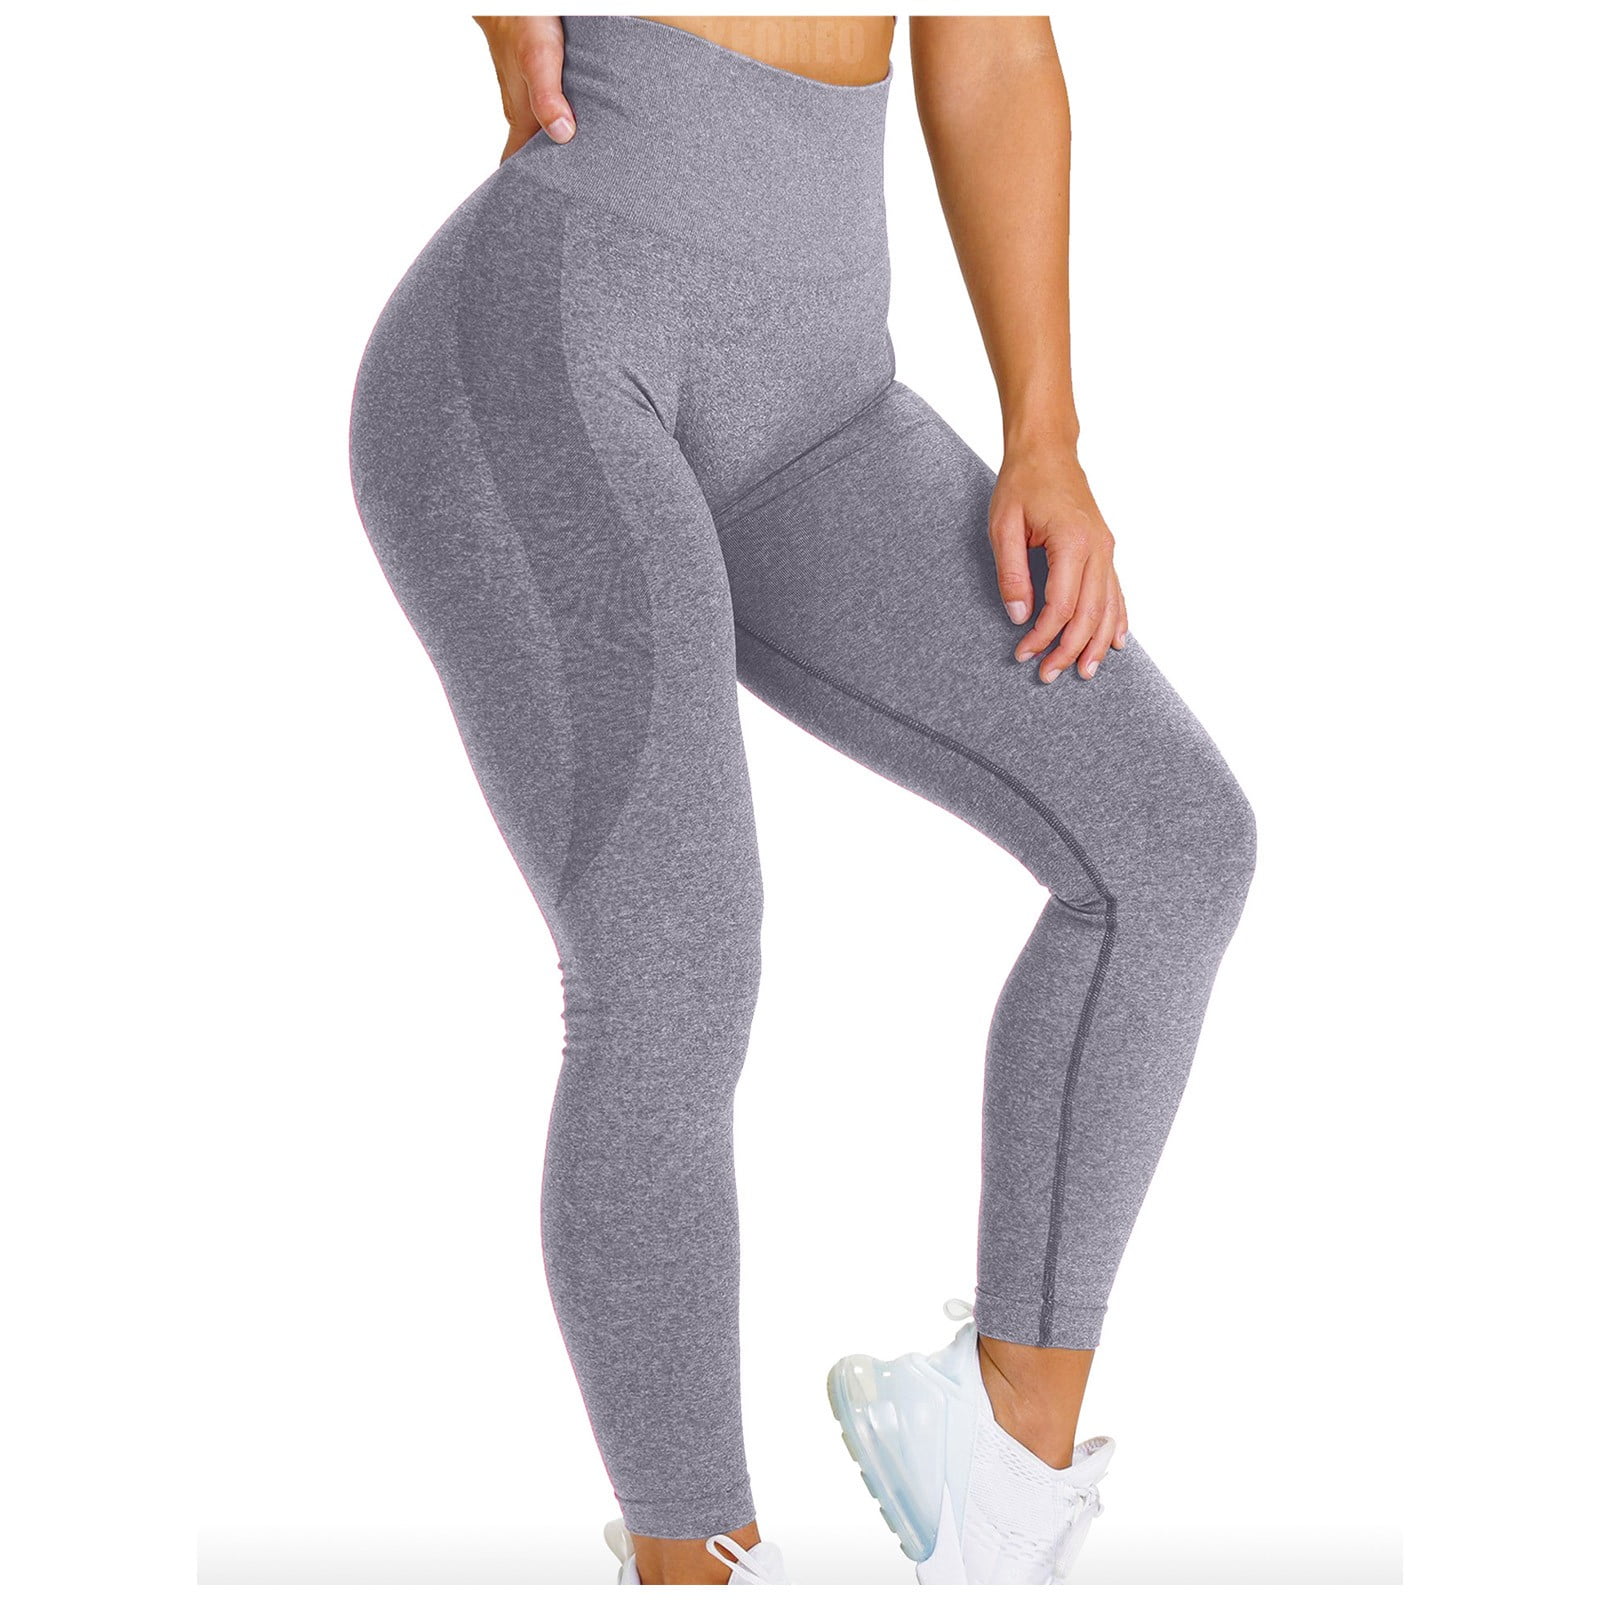 Ierhent Bootcut Yoga Pants for Women with Pockets Leggings for